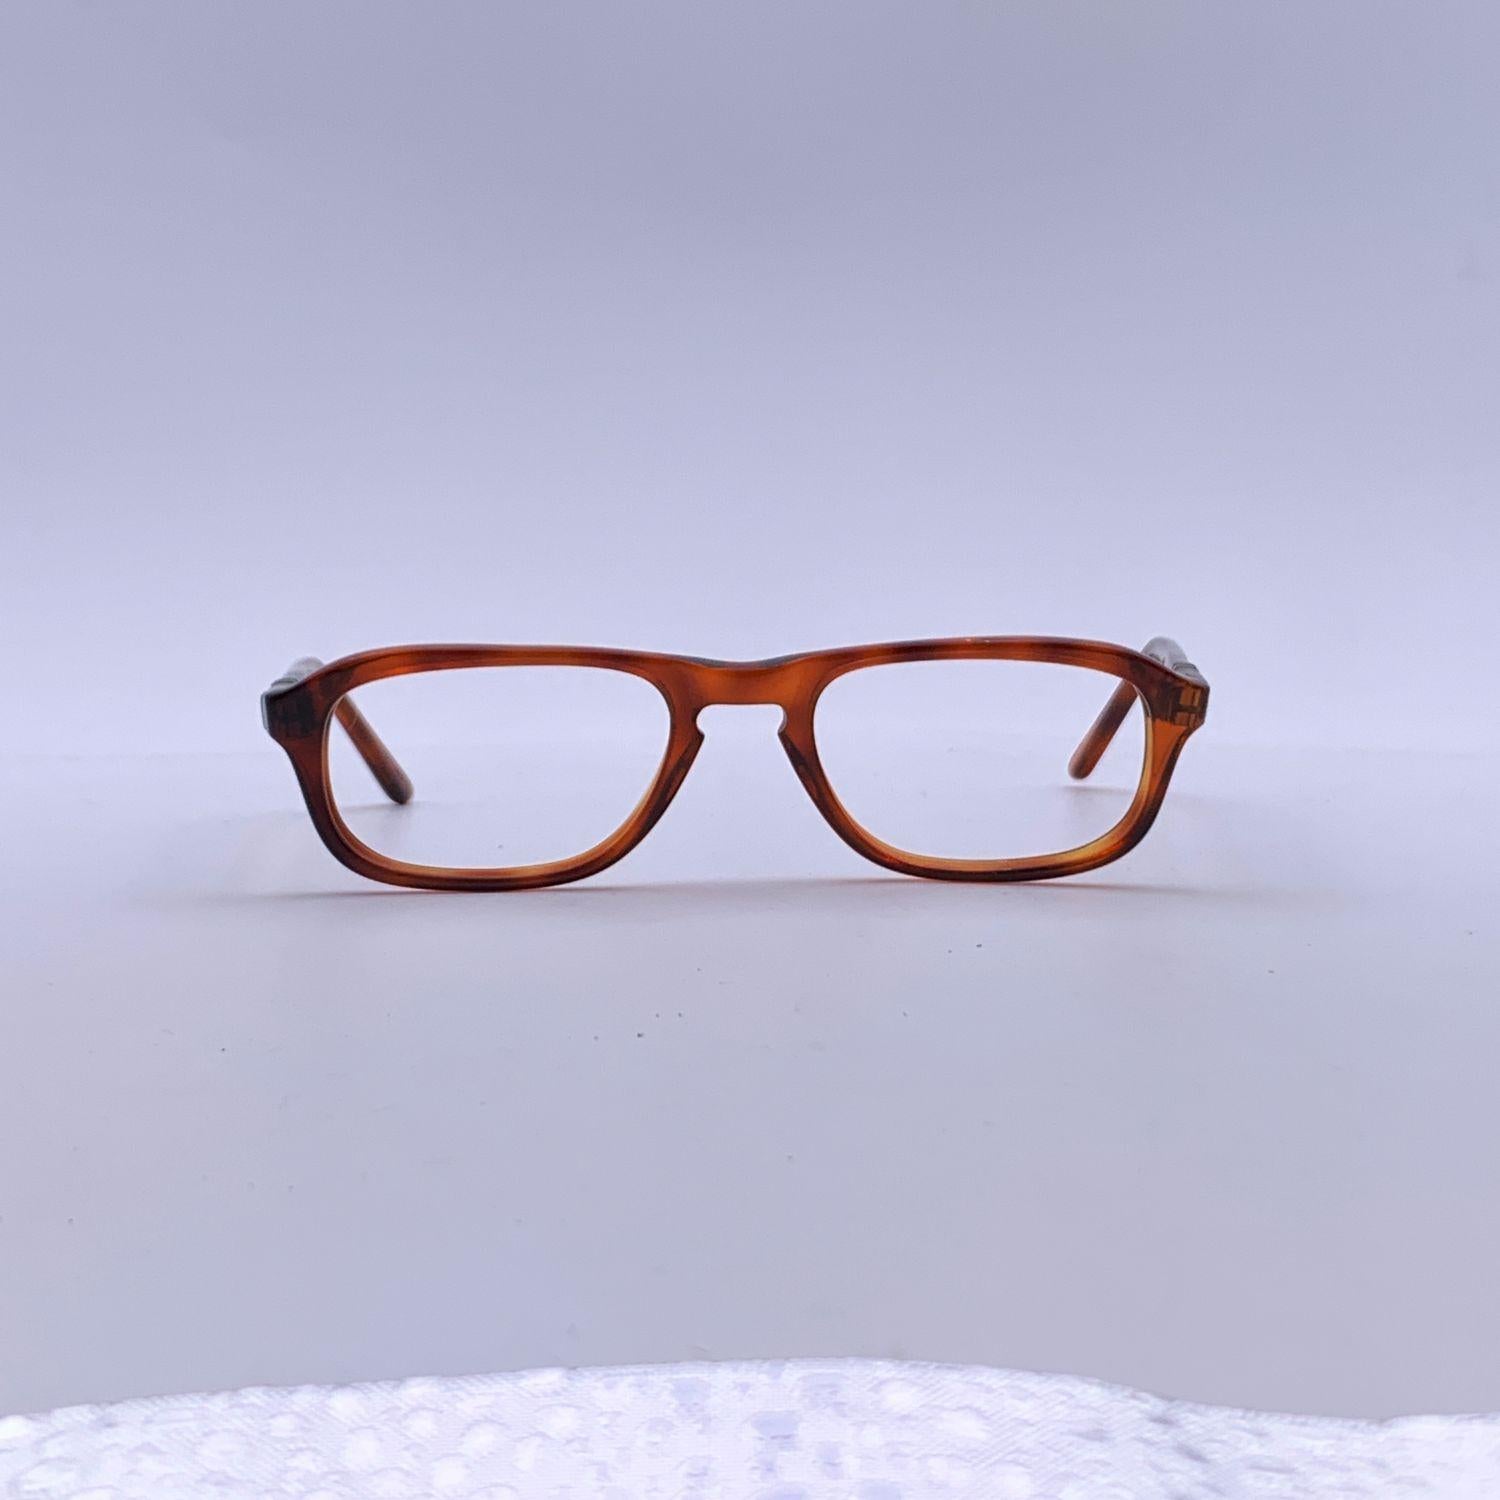 PERSOL Meflecto Ratti Vintage Eyeglasses- Model: Jolly 1. Brown acetate frame. No lenses. Flexible temples. Made in Italy. Style & Refs: Jolly 1 - 48-68

Details

MATERIAL: Acetate

COLOR: Brown

MODEL: Jolly 1

GENDER: Women

COUNTRY OF